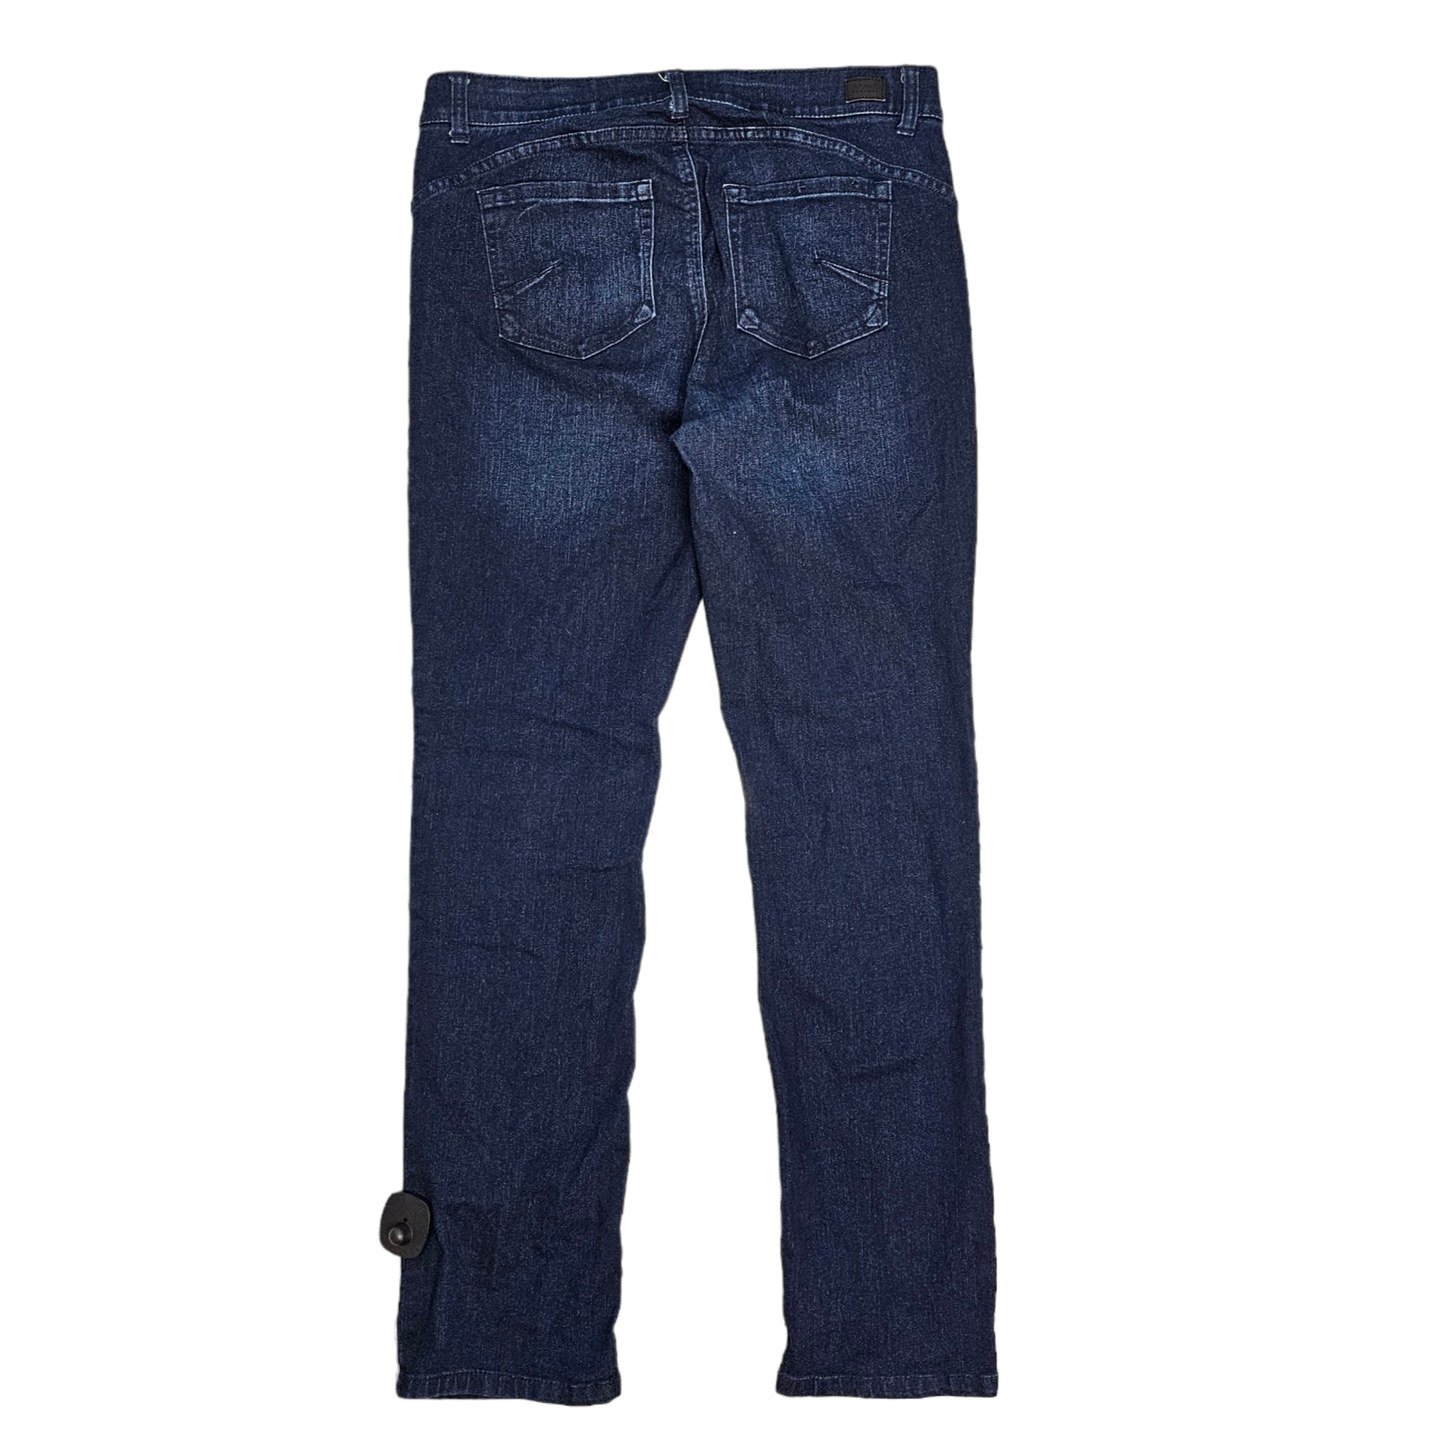 Jeans Straight By Jones New York  Size: 12